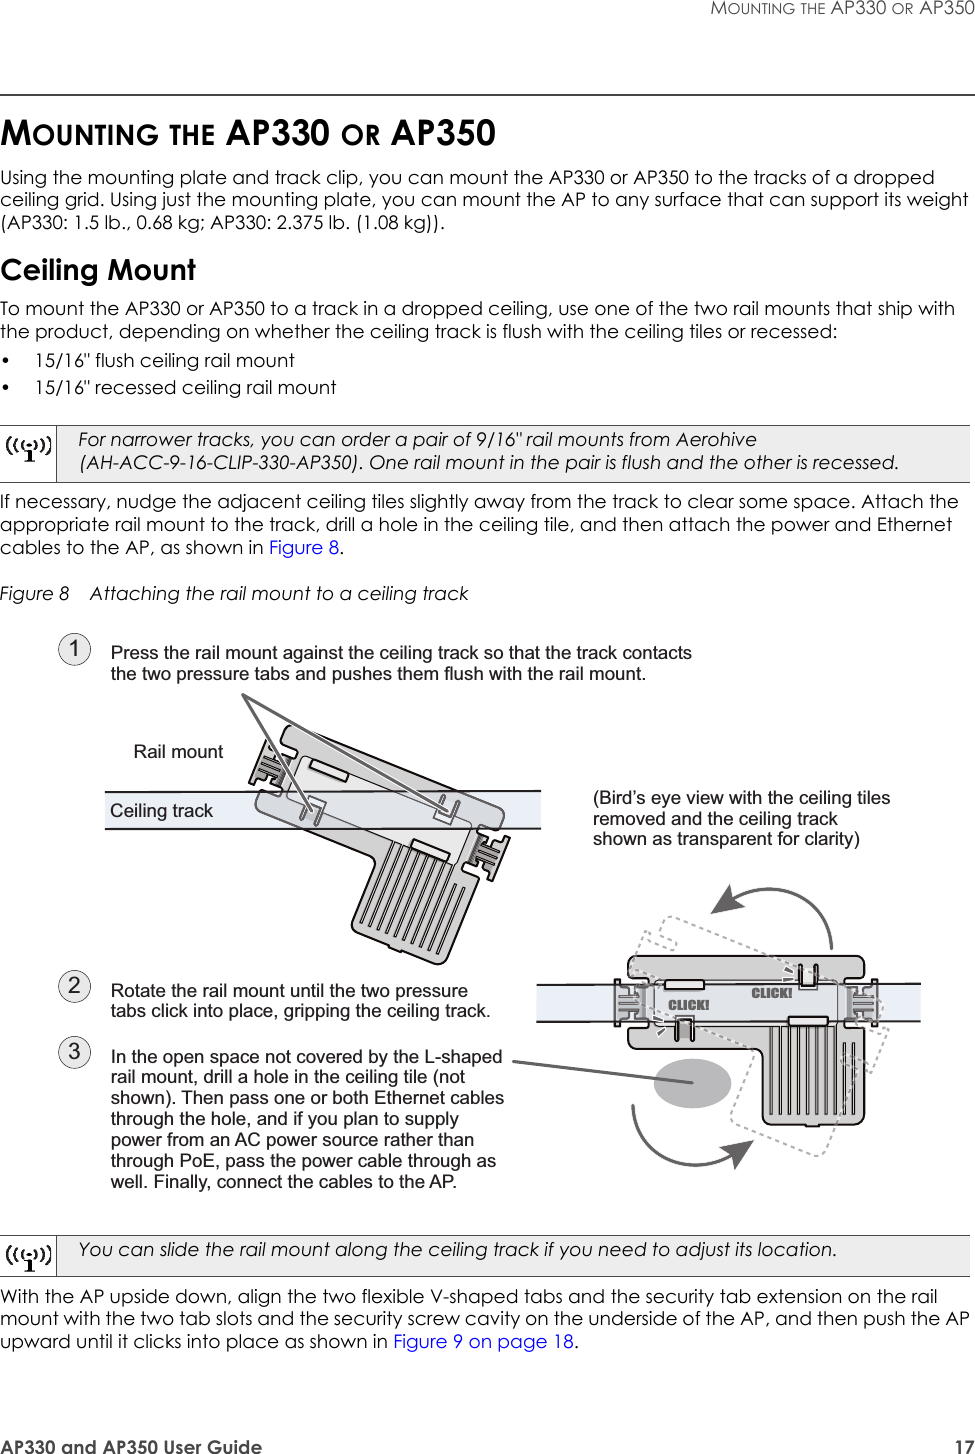 AP330 and AP350 User Guide 17MOUNTING THE AP330 OR AP350MOUNTING THE AP330 OR AP350Using the mounting plate and track clip, you can mount the AP330 or AP350 to the tracks of a dropped ceiling grid. Using just the mounting plate, you can mount the AP to any surface that can support its weight (AP330: 1.5 lb., 0.68 kg; AP330: 2.375 lb. (1.08 kg)).Ceiling MountTo mount the AP330 or AP350 to a track in a dropped ceiling, use one of the two rail mounts that ship with the product, depending on whether the ceiling track is flush with the ceiling tiles or recessed:• 15/16&quot; flush ceiling rail mount• 15/16&quot; recessed ceiling rail mountIf necessary, nudge the adjacent ceiling tiles slightly away from the track to clear some space. Attach the appropriate rail mount to the track, drill a hole in the ceiling tile, and then attach the power and Ethernet cables to the AP, as shown in Figure 8.Figure 8  Attaching the rail mount to a ceiling trackWith the AP upside down, align the two flexible V-shaped tabs and the security tab extension on the rail mount with the two tab slots and the security screw cavity on the underside of the AP, and then push the AP upward until it clicks into place as shown in Figure 9 on page 18.For narrower tracks, you can order a pair of 9/16&quot; rail mounts from Aerohive (AH-ACC-9-16-CLIP-330-AP350). One rail mount in the pair is flush and the other is recessed.You can slide the rail mount along the ceiling track if you need to adjust its location.Press the rail mount against the ceiling track so that the track contacts the two pressure tabs and pushes them flush with the rail mount.(Bird’s eye view with the ceiling tiles removed and the ceiling track shown as transparent for clarity)Rotate the rail mount until the two pressure tabs click into place, gripping the ceiling track.2In the open space not covered by the L-shaped rail mount, drill a hole in the ceiling tile (not shown). Then pass one or both Ethernet cables through the hole, and if you plan to supply power from an AC power source rather than through PoE, pass the power cable through as well. Finally, connect the cables to the AP.31Rail mountCeiling trackCLICK!CLICK!